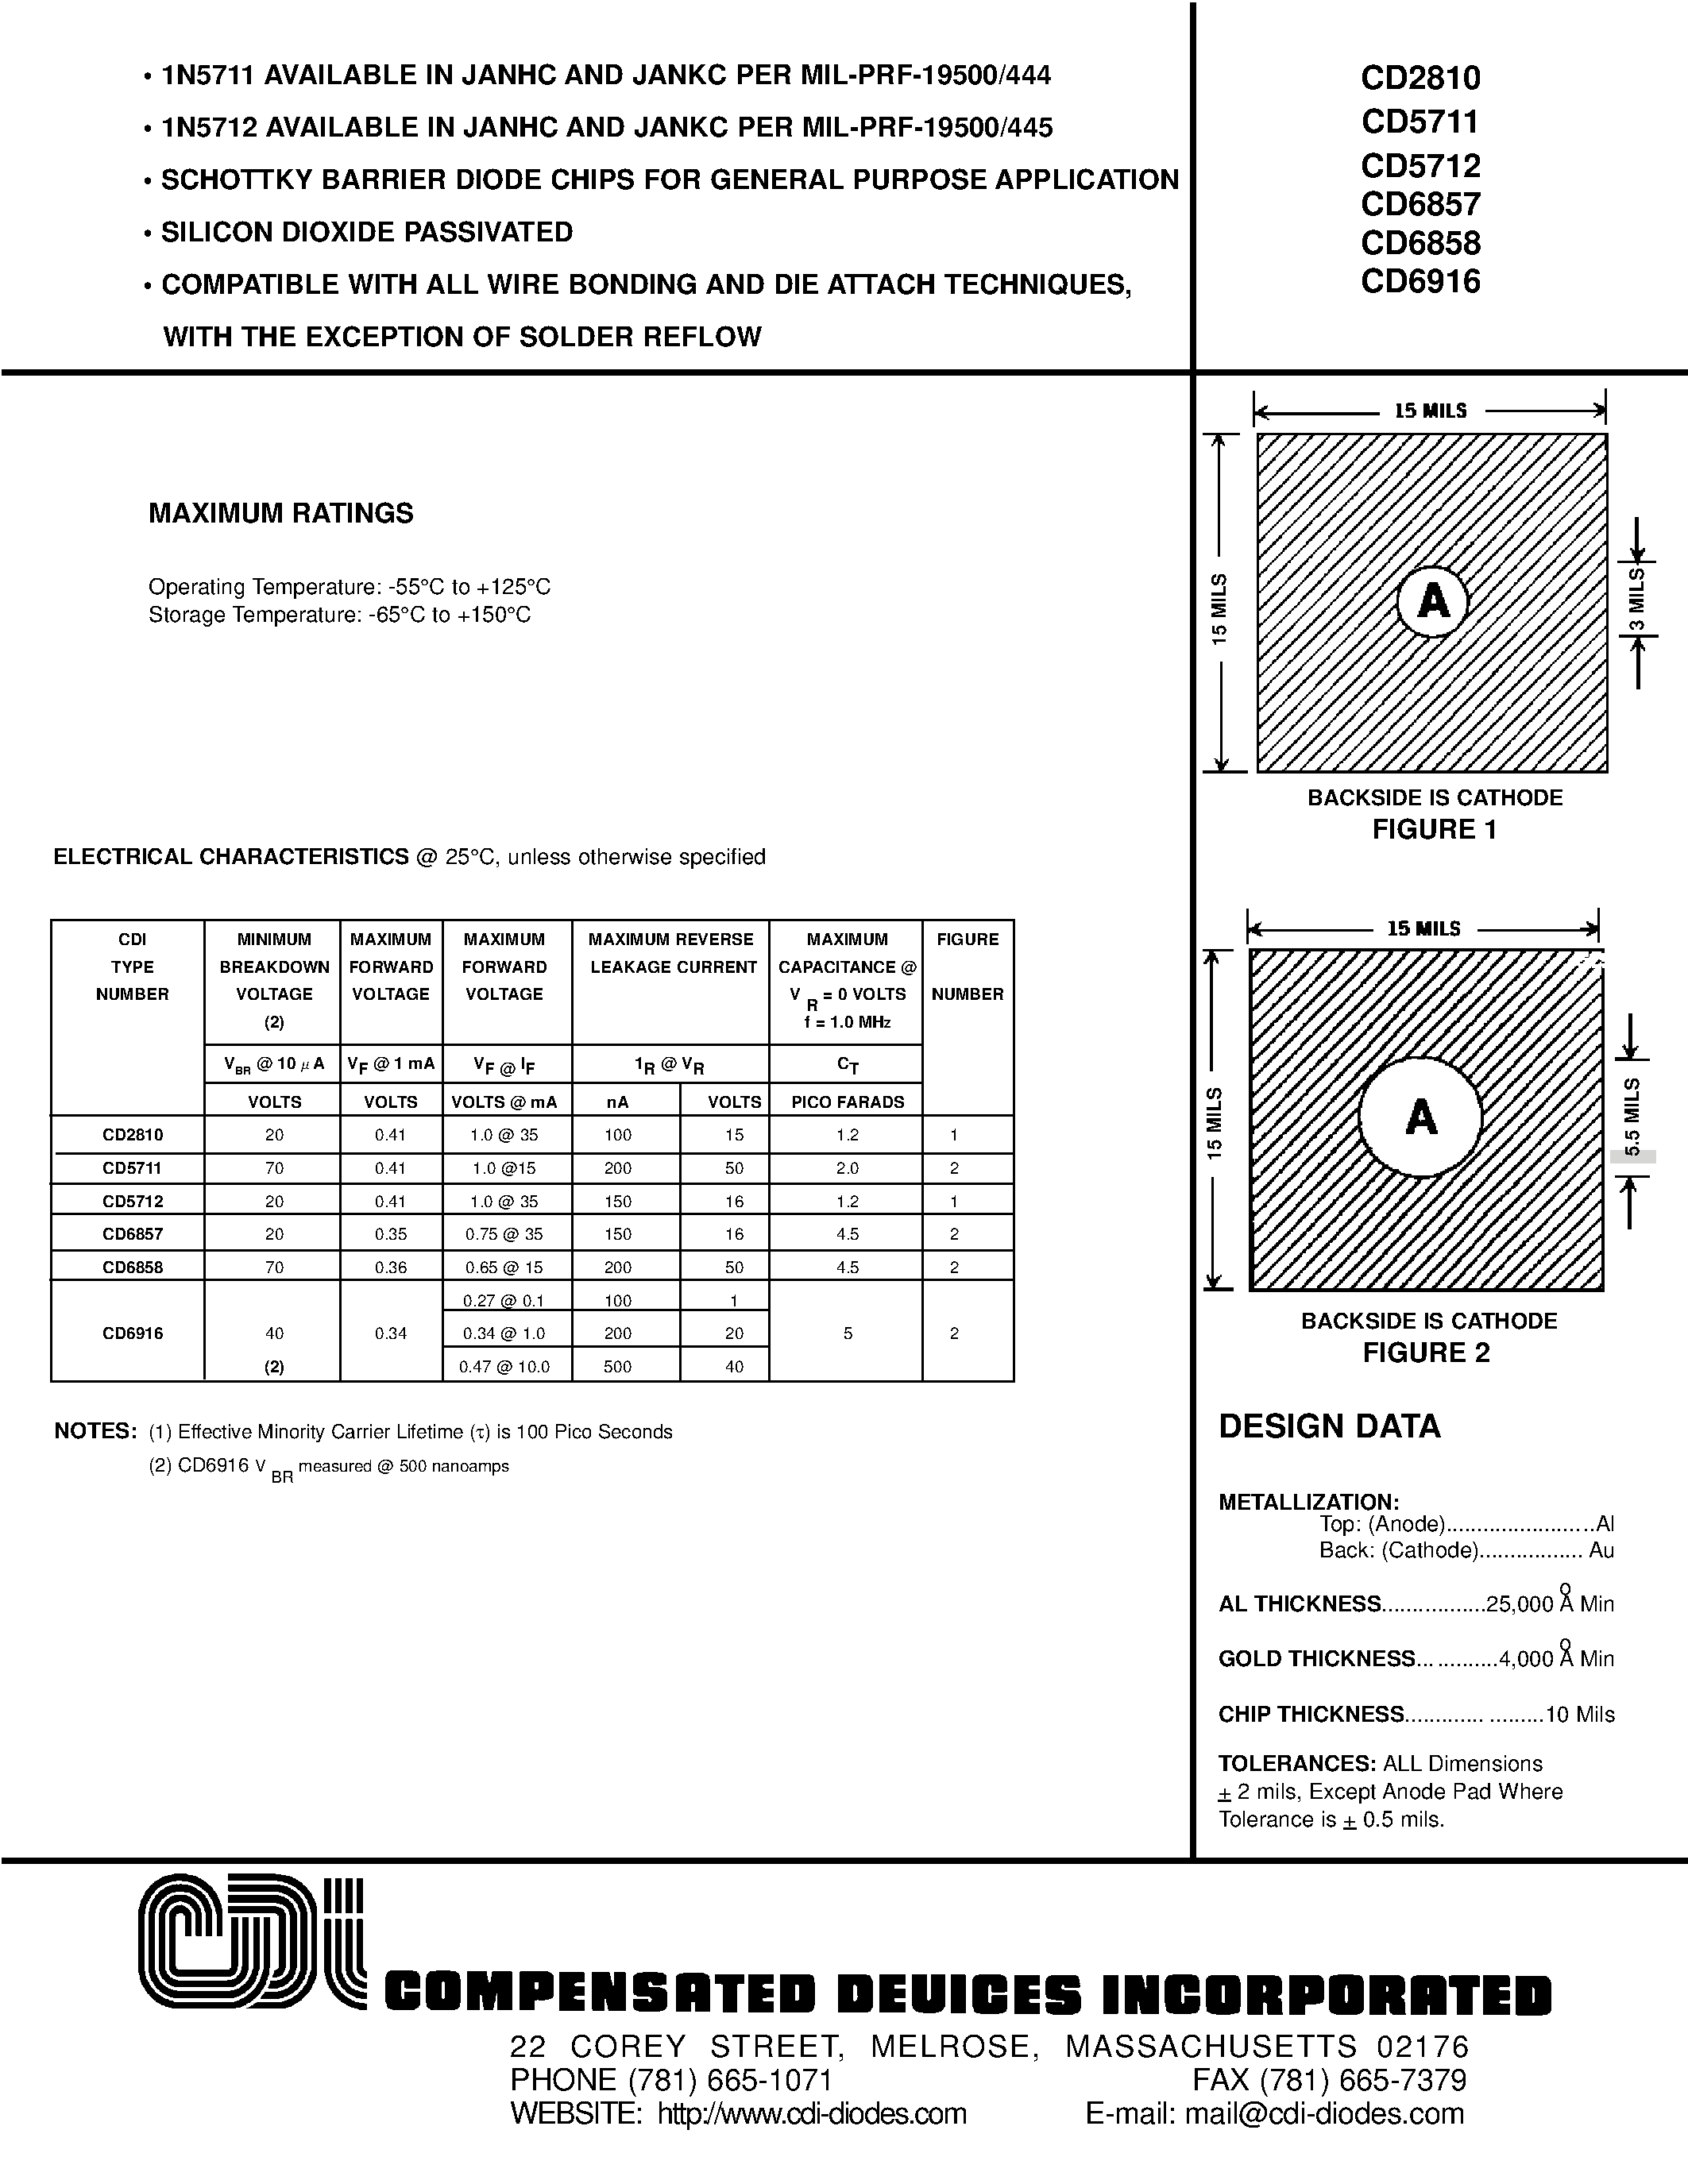 Datasheet CD5712 - SCHOTTKY BARRIER DIODE CHIPS FOR GENERAL PURPOSE APPLICATION page 1